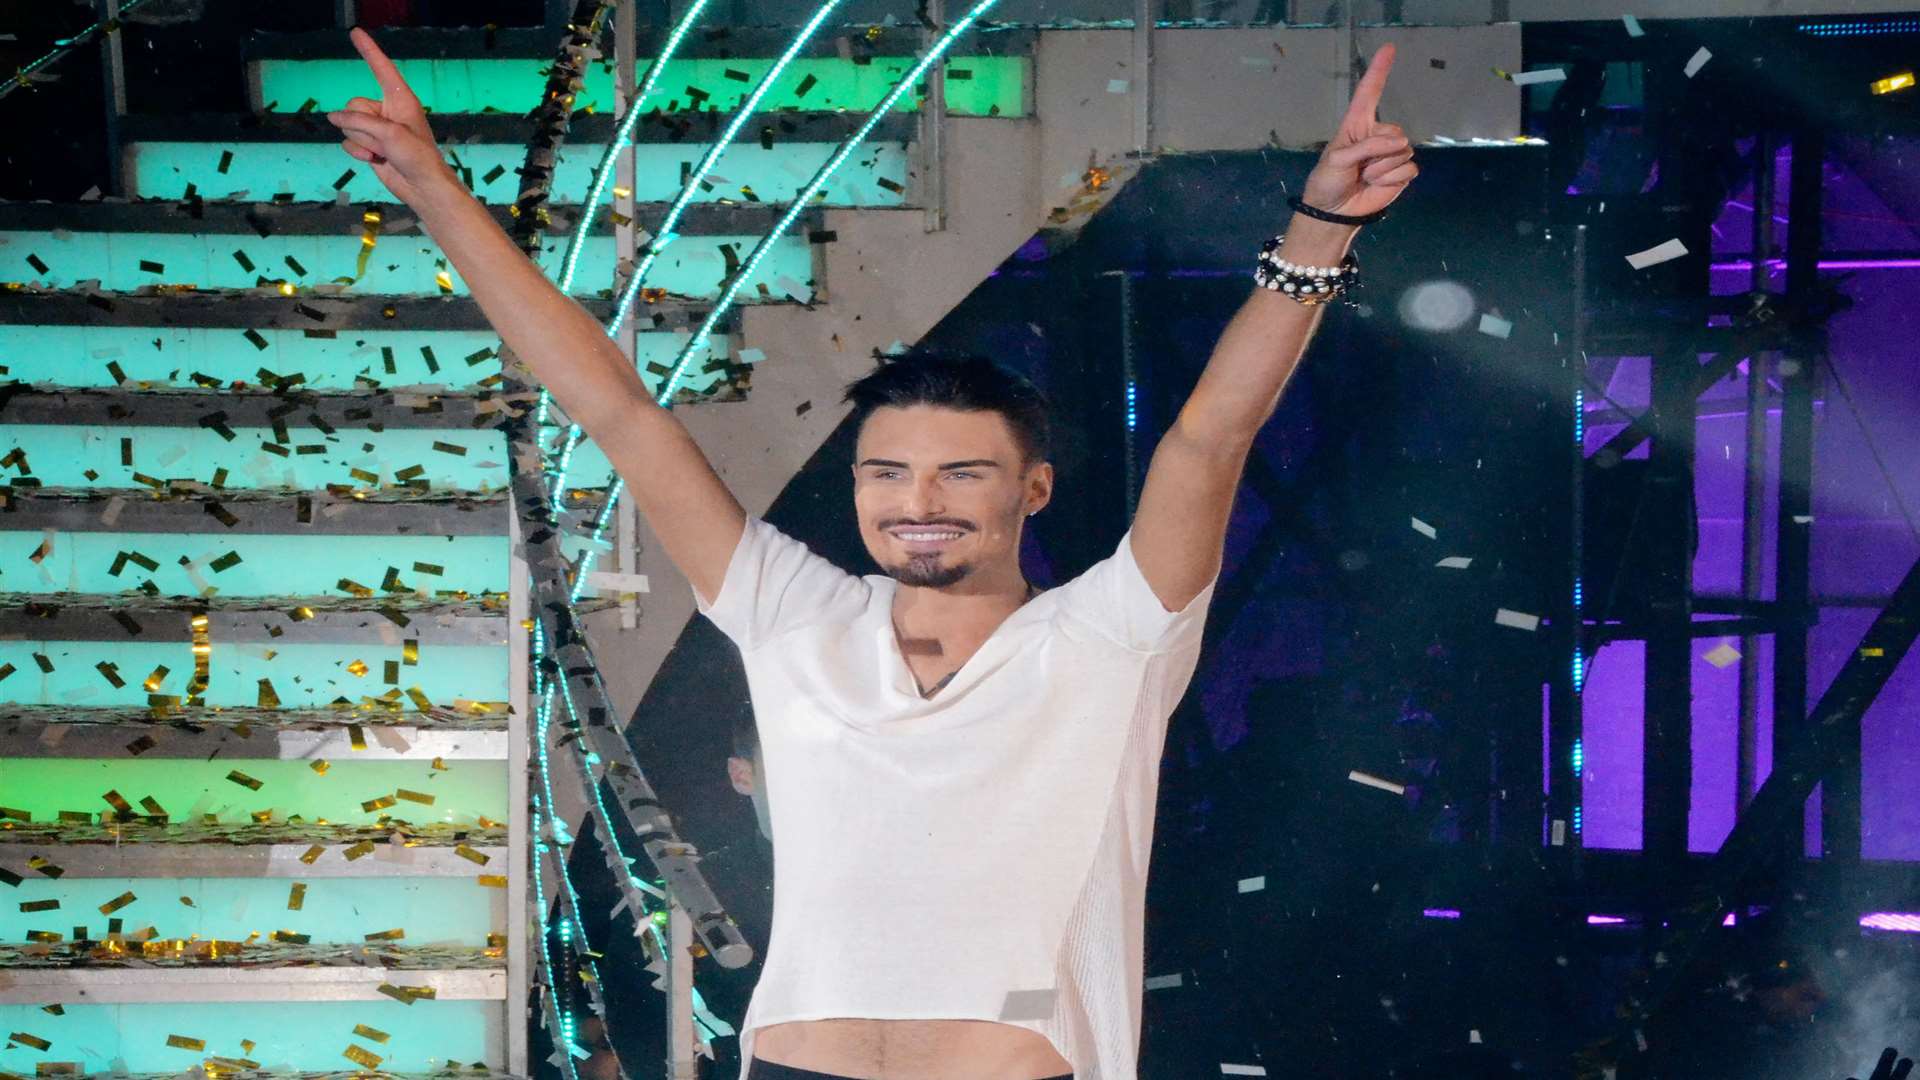 Rylan emerging victorious from the Celebrity Big Brother house